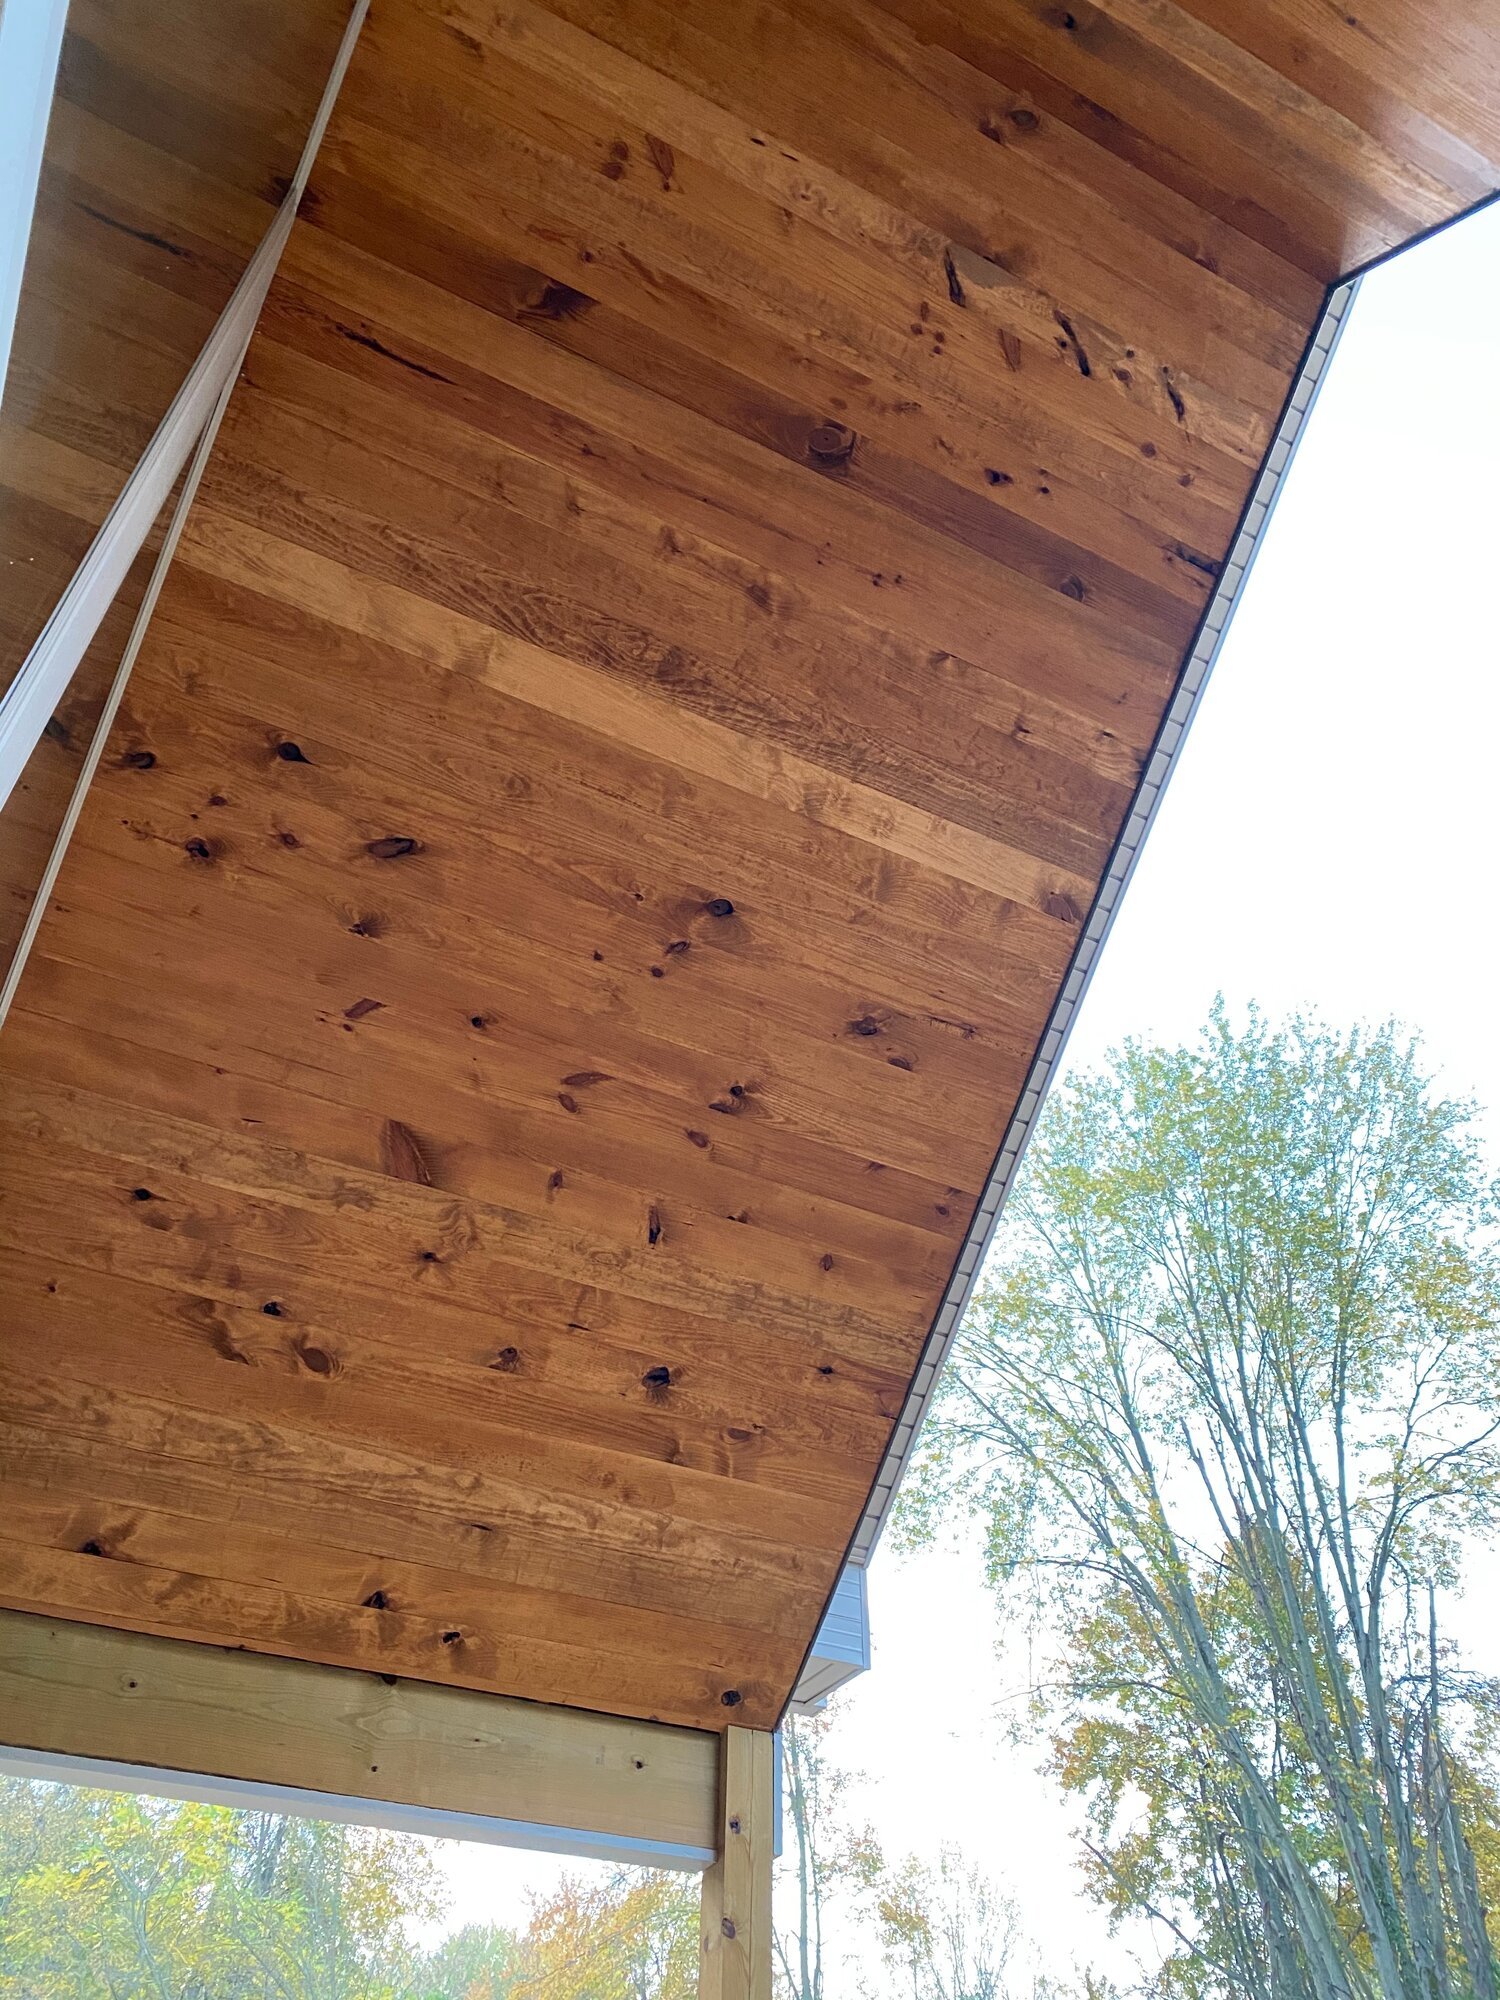  On their porch ceiling, the ratio of their stain was 80% pecan to 20% dark oak. 